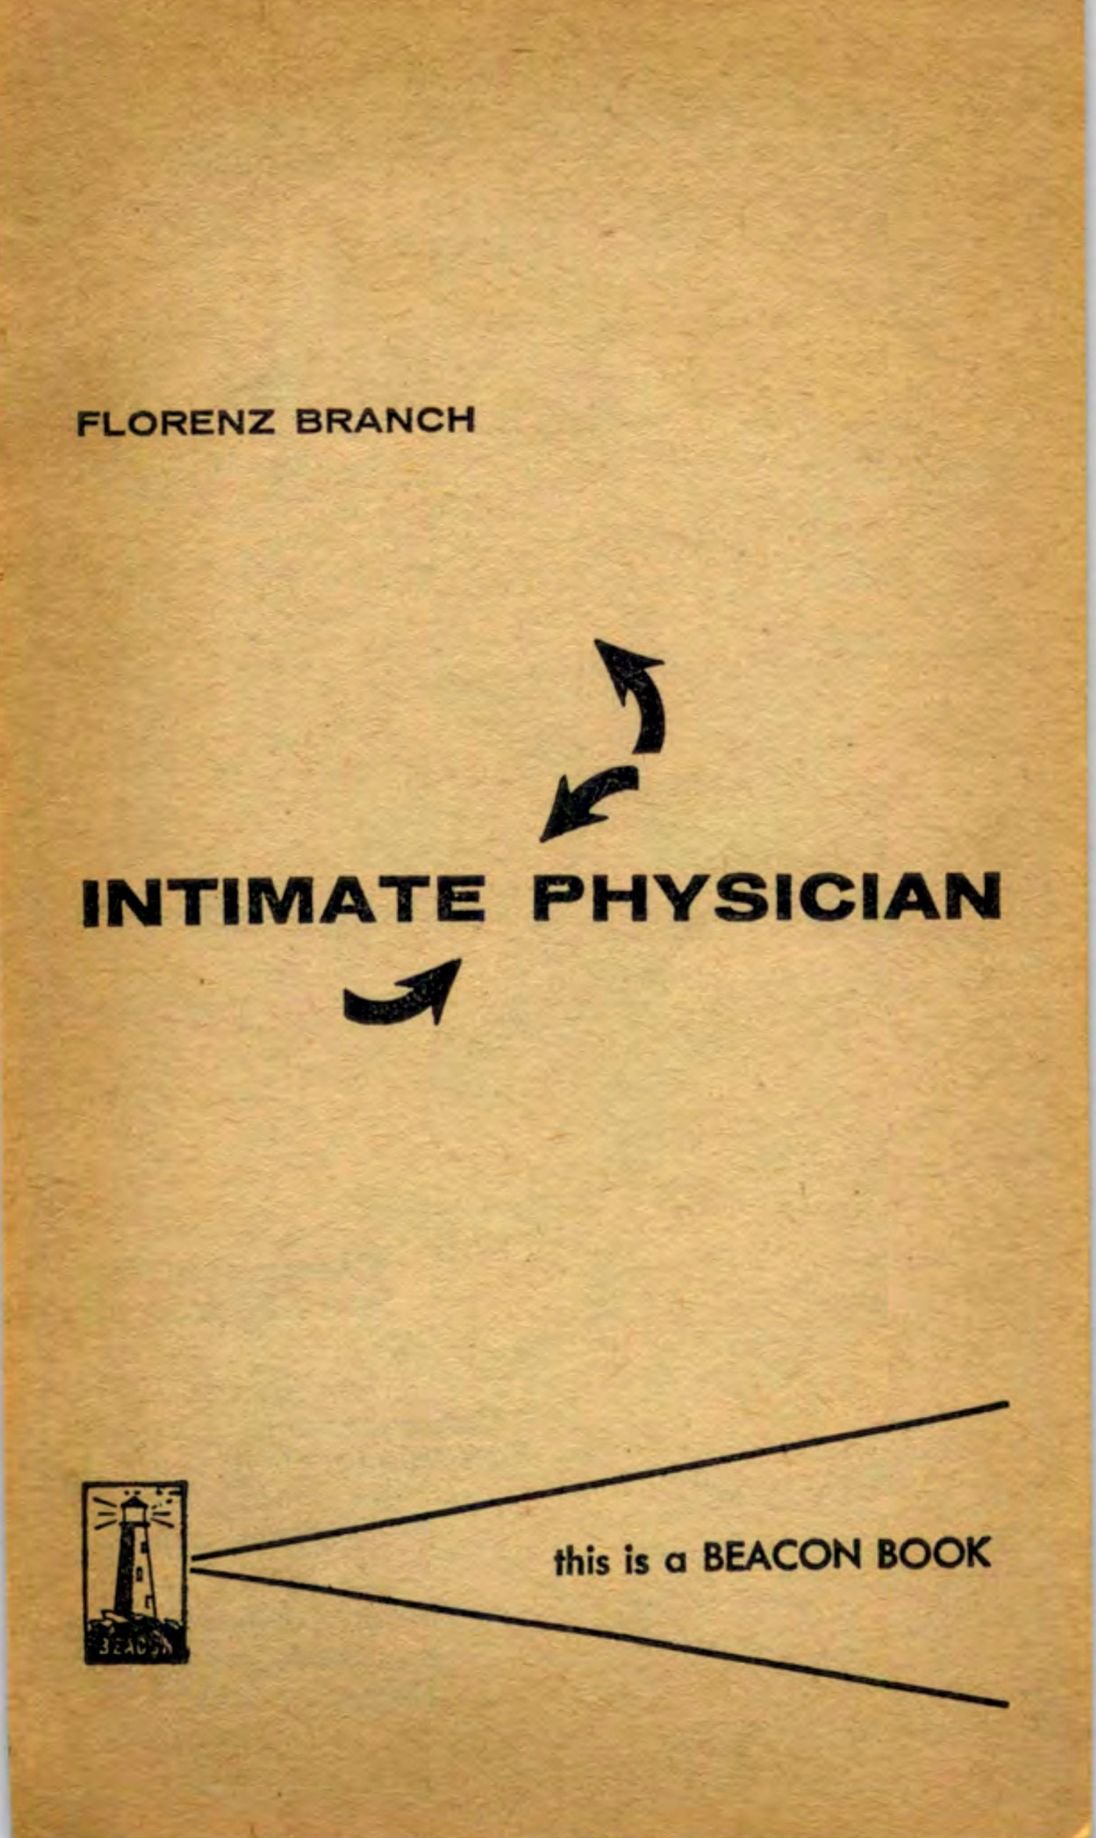 Intimate Physician by Florenz Branch page 003.jpg